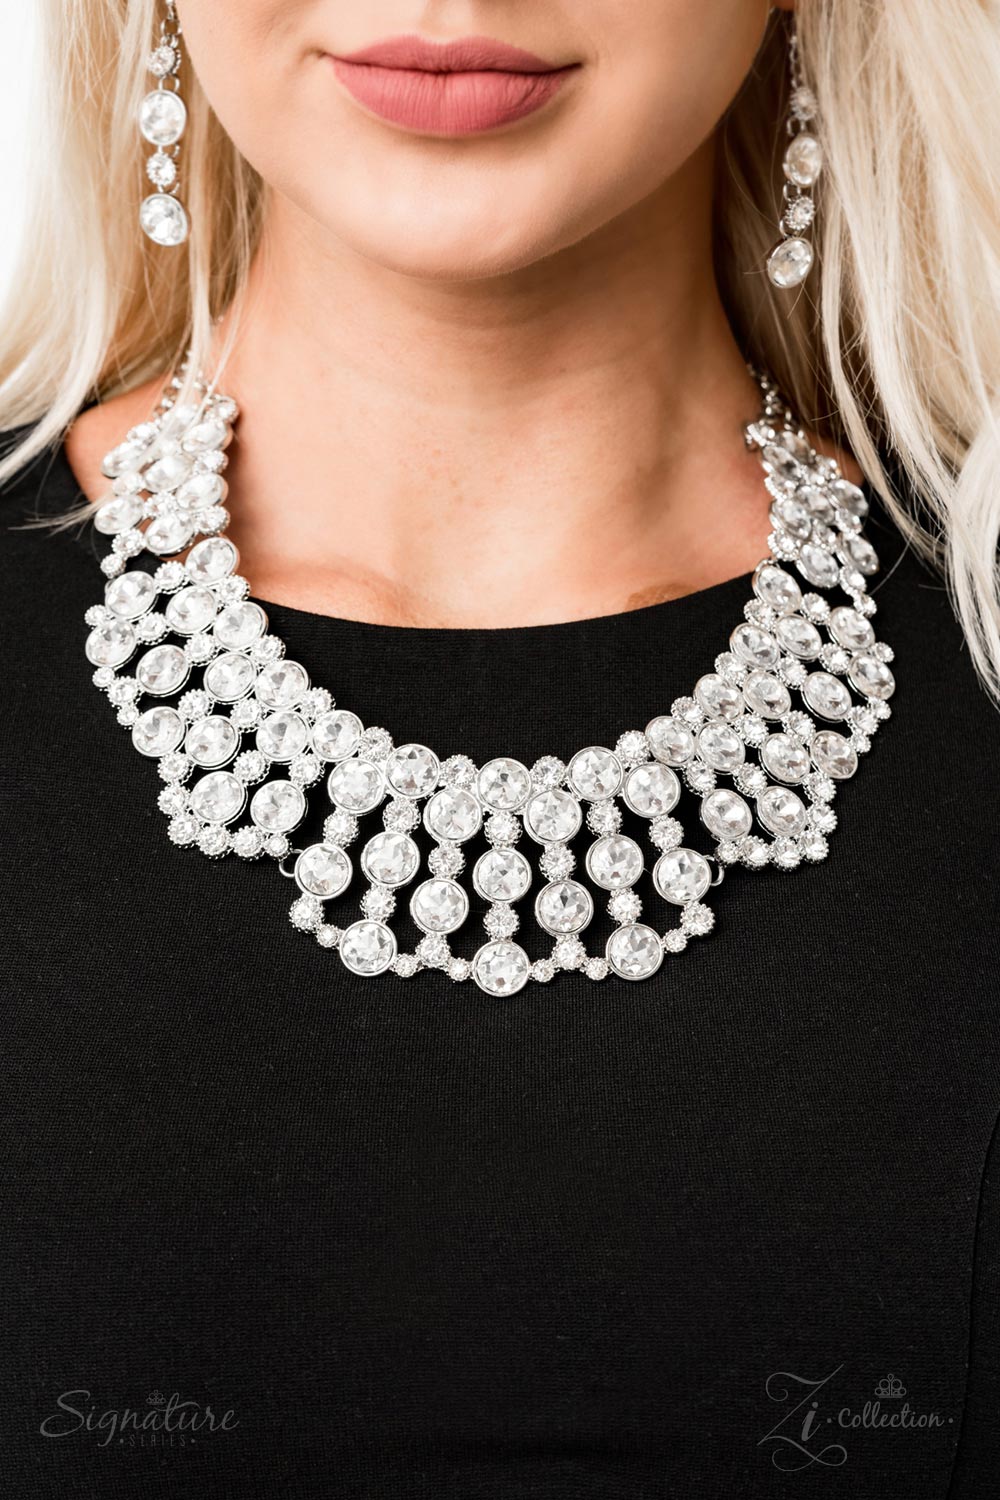 The Heather Zi Collection White Paparazzi Necklace Cashmere Pink Jewels - Cashmere Pink Jewels & Accessories, Cashmere Pink Jewels & Accessories - Paparazzi